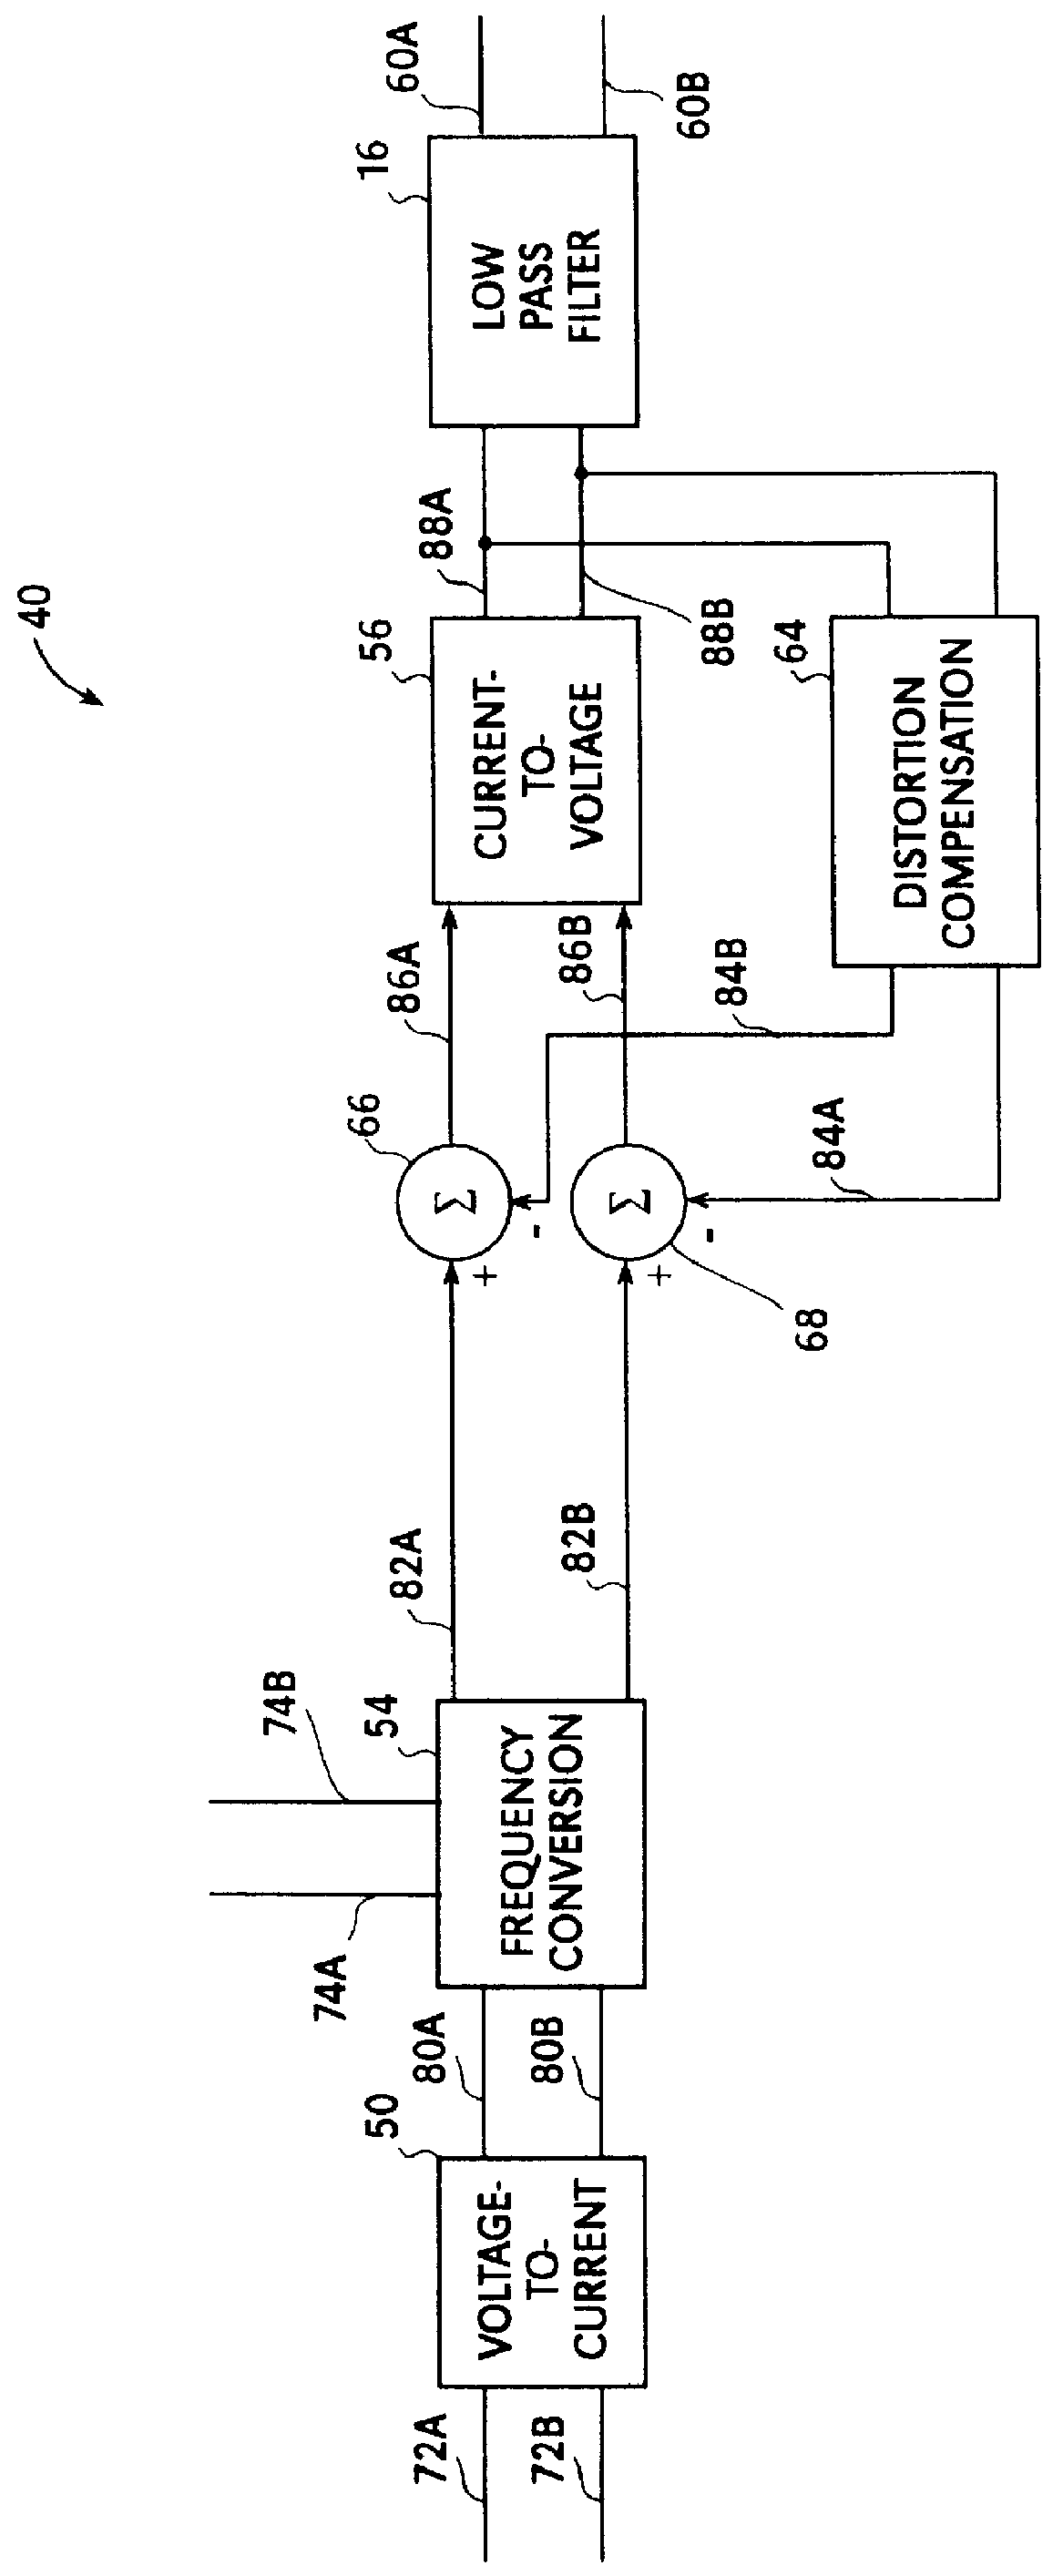 Direct conversion receiver with reduced even order distortion